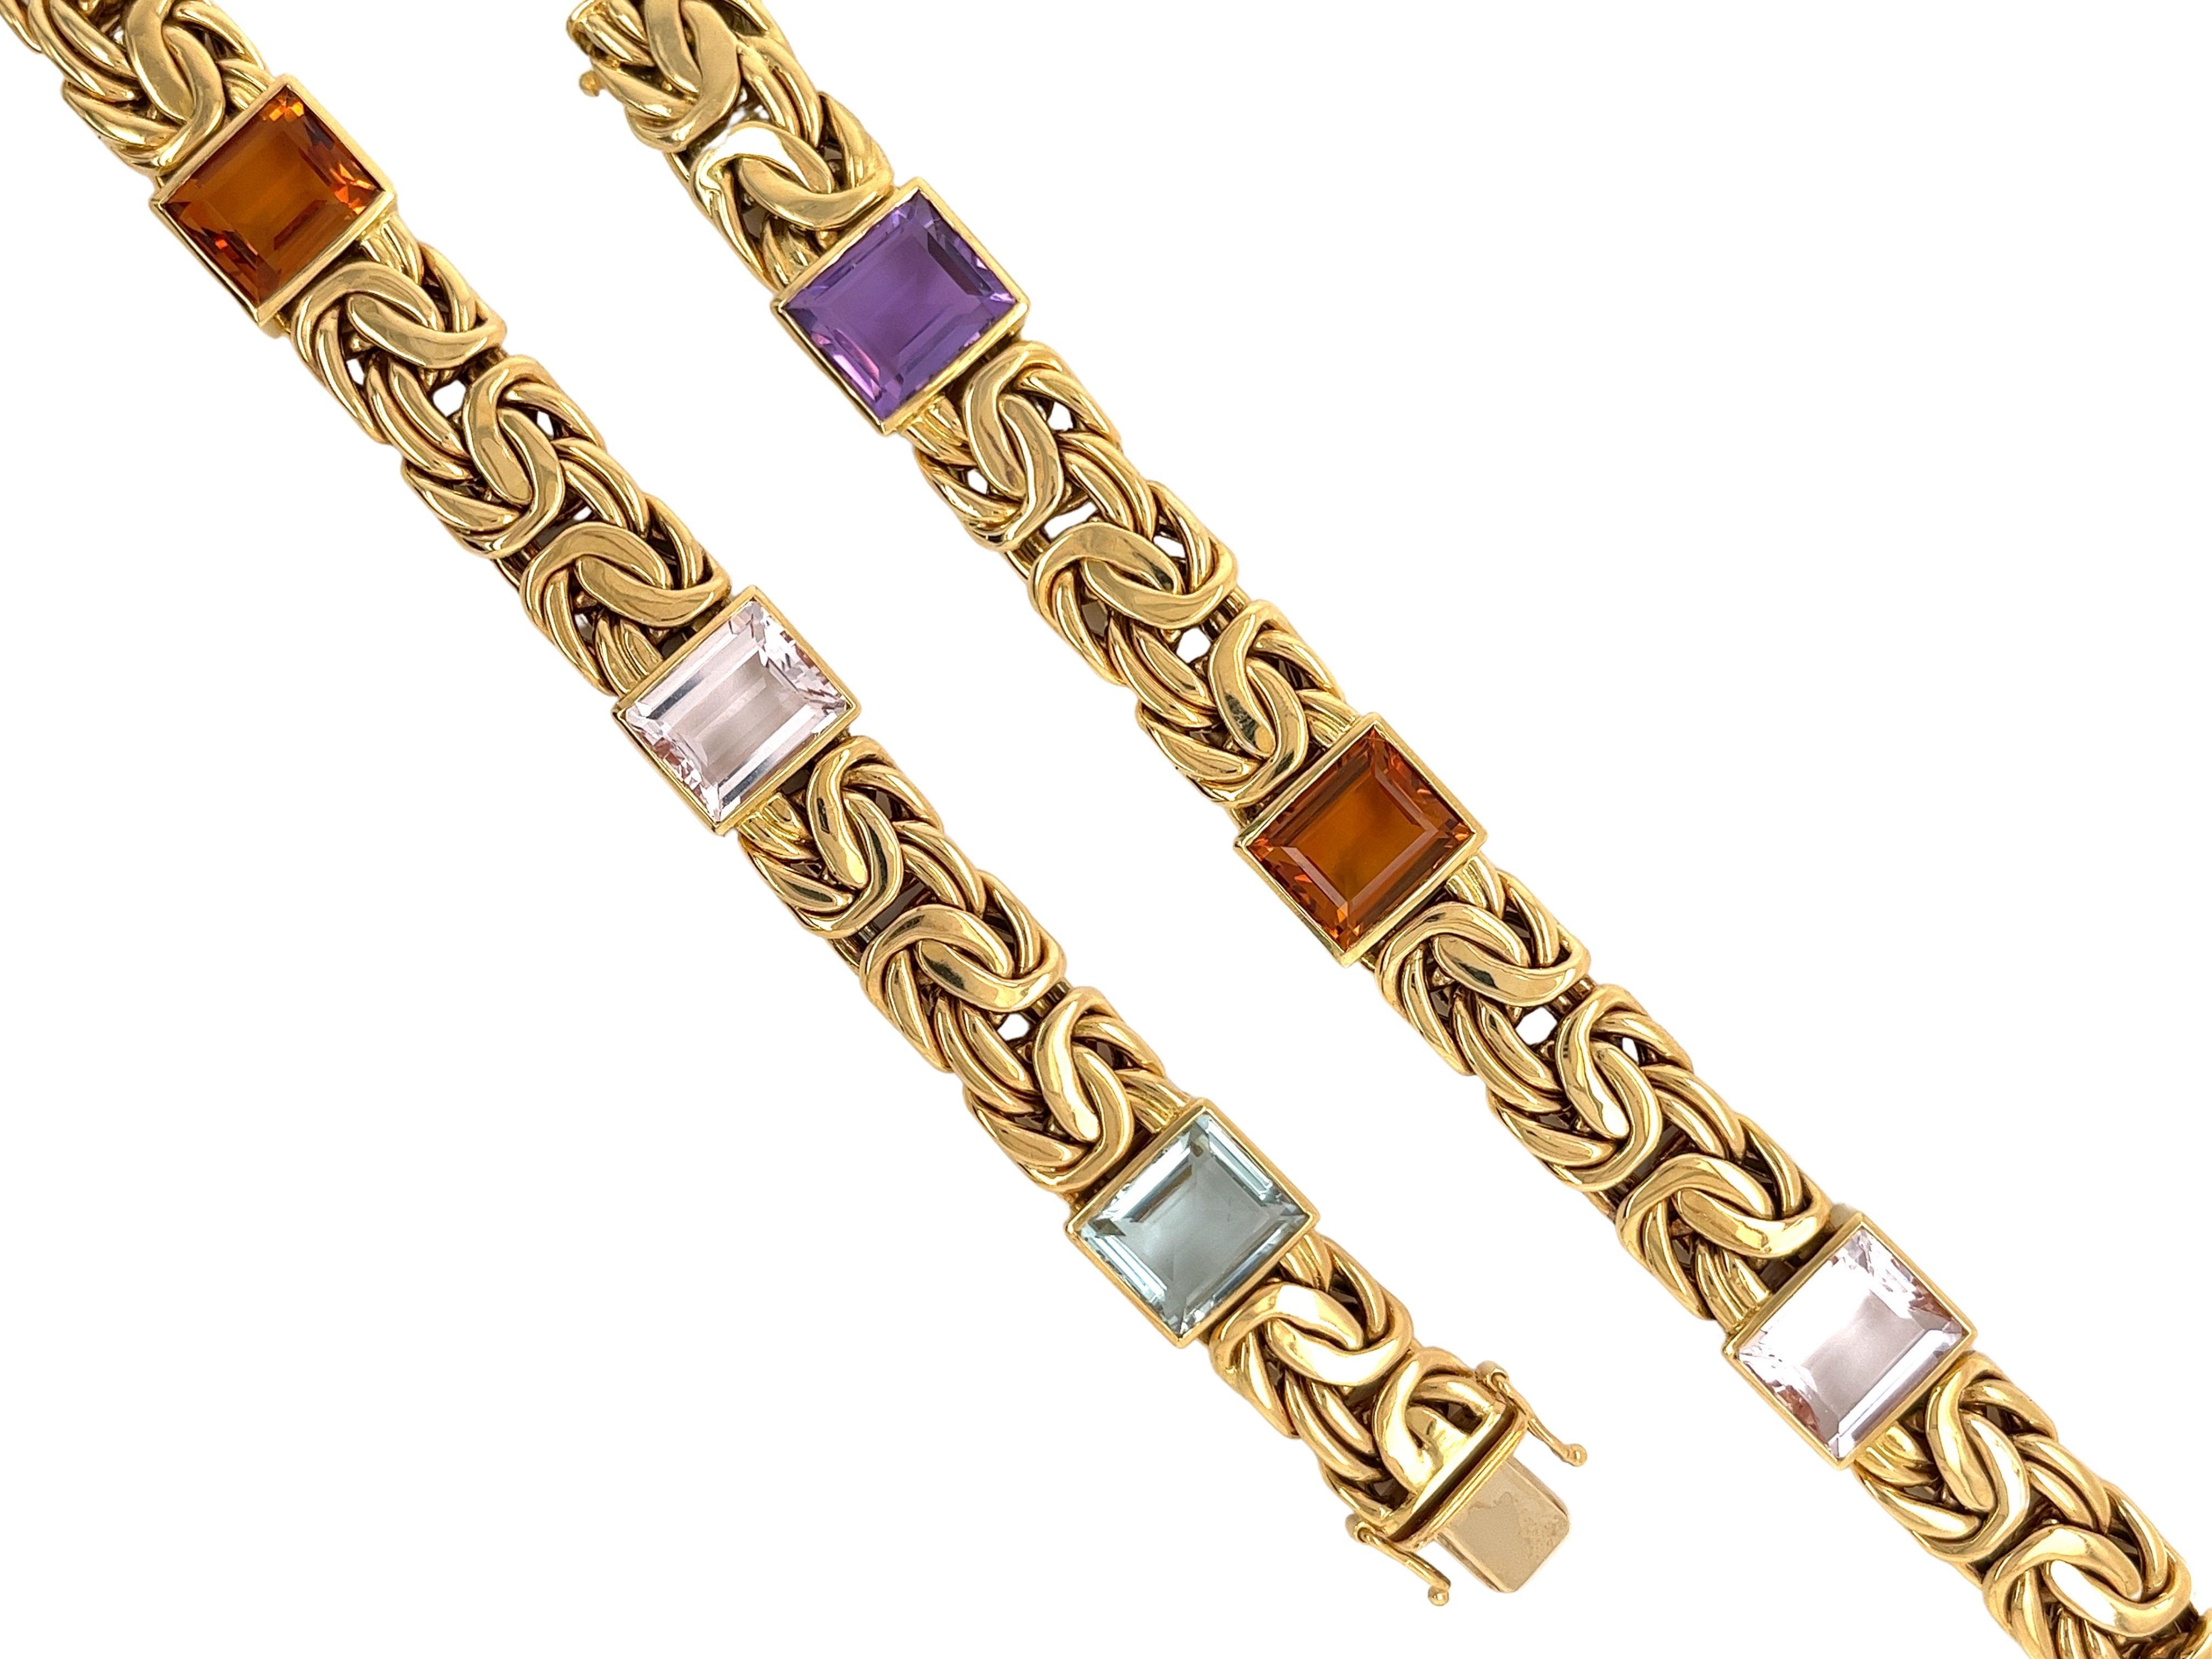 Byzantine style Multi-Gem bracelet/necklace in 18 karat gold. Set with 4 emerald cut gemstones of varying species and colors. Handcrafted in Germany with bezel set Kunzite, Citrine, Aquamarine, and Amethyst. Polished finish for long-lasting shine.